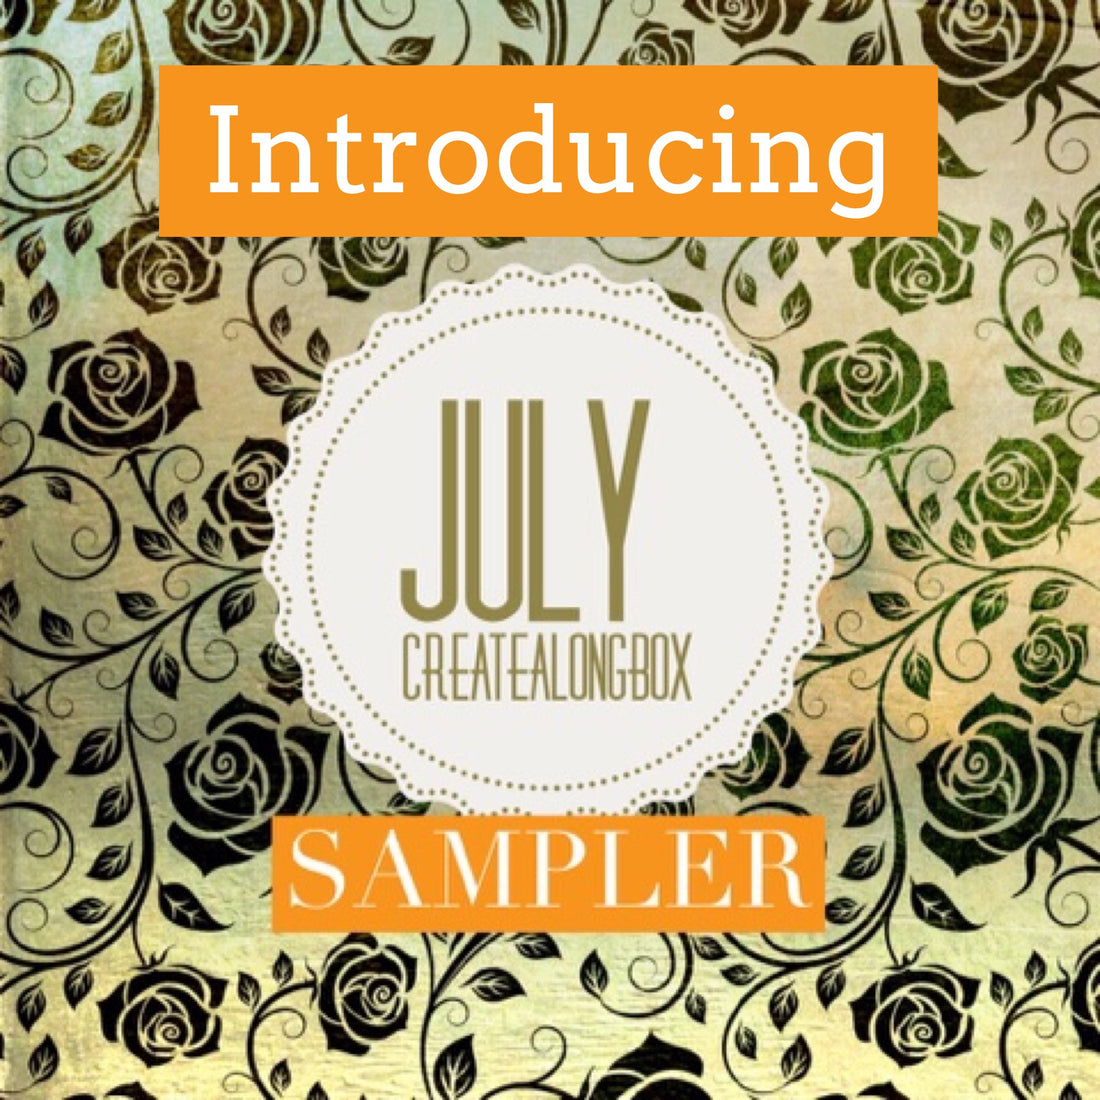 New Create Along Box Sampler Get your before they are gone!